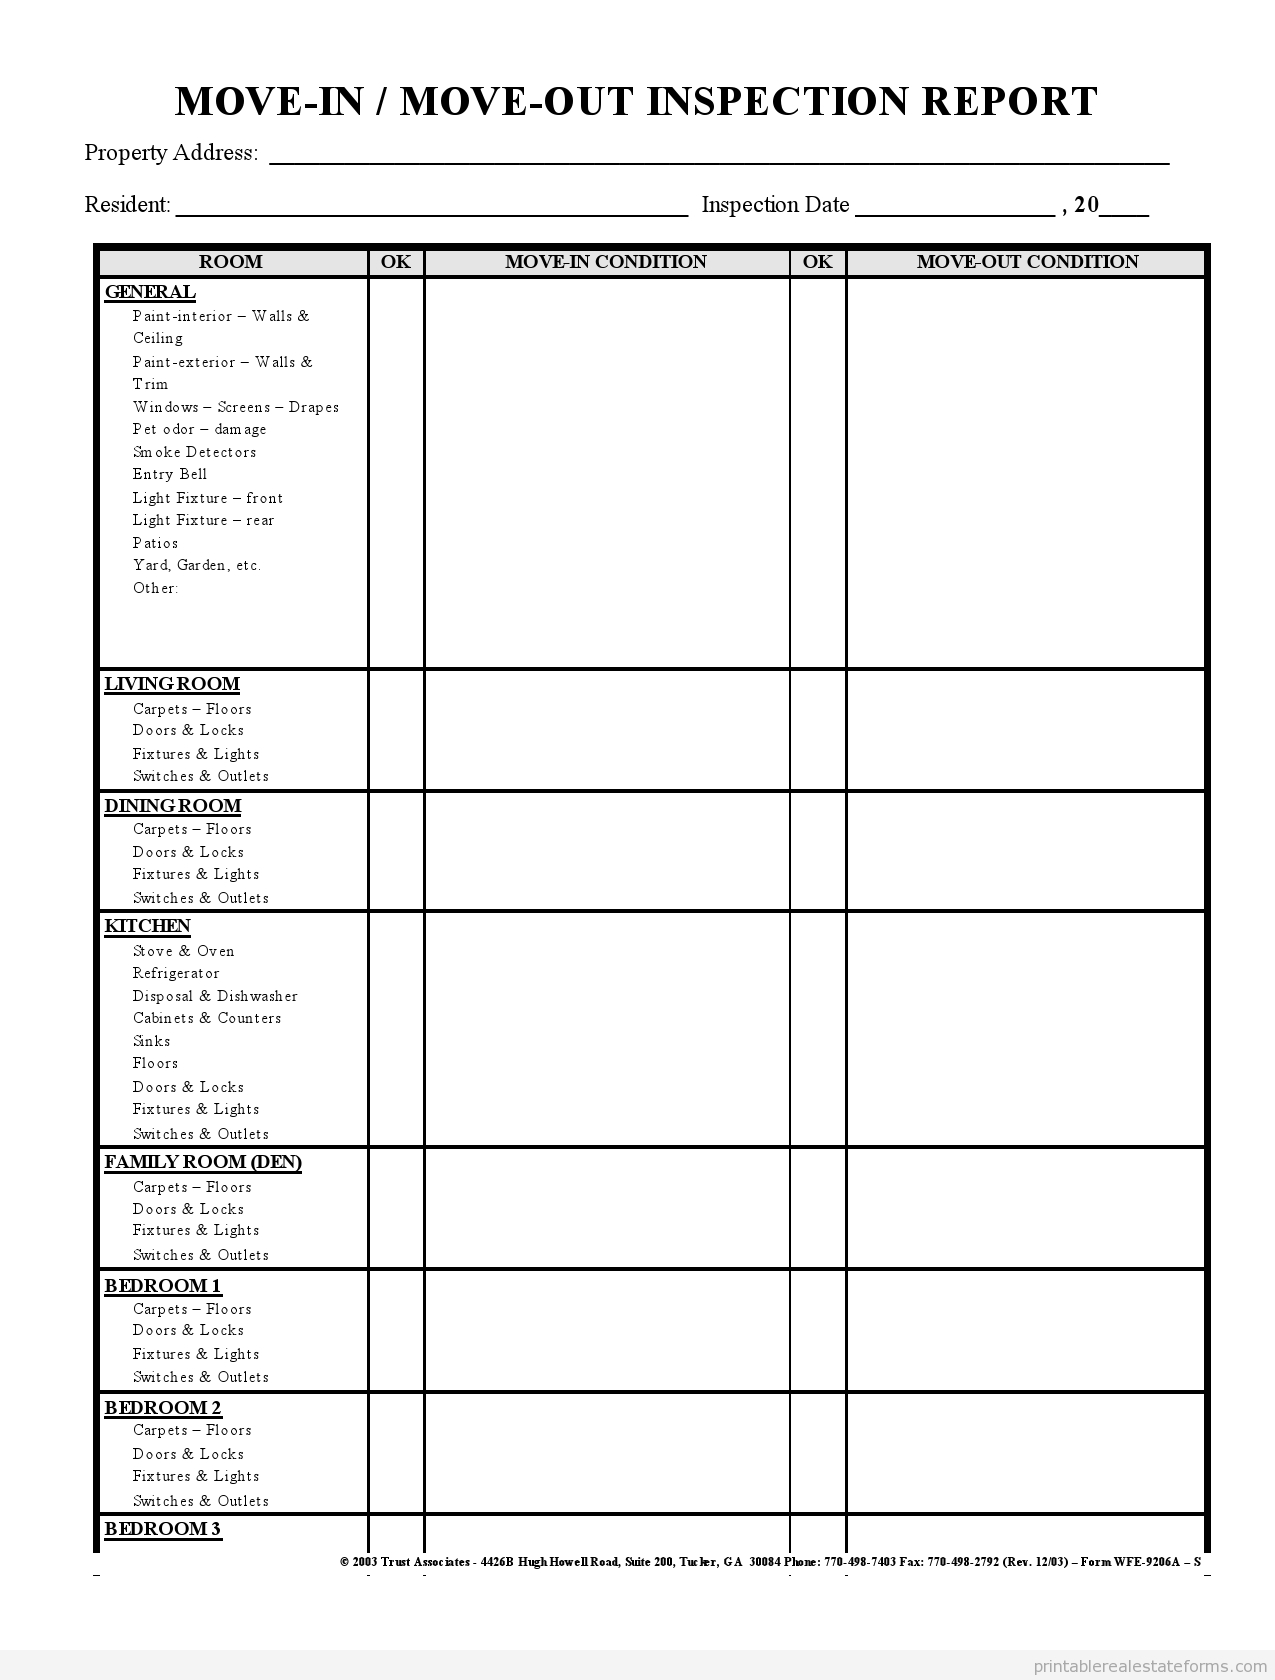 Sample Printable Move In Move Out Inspection Report Form In Within Real Estate Report Template